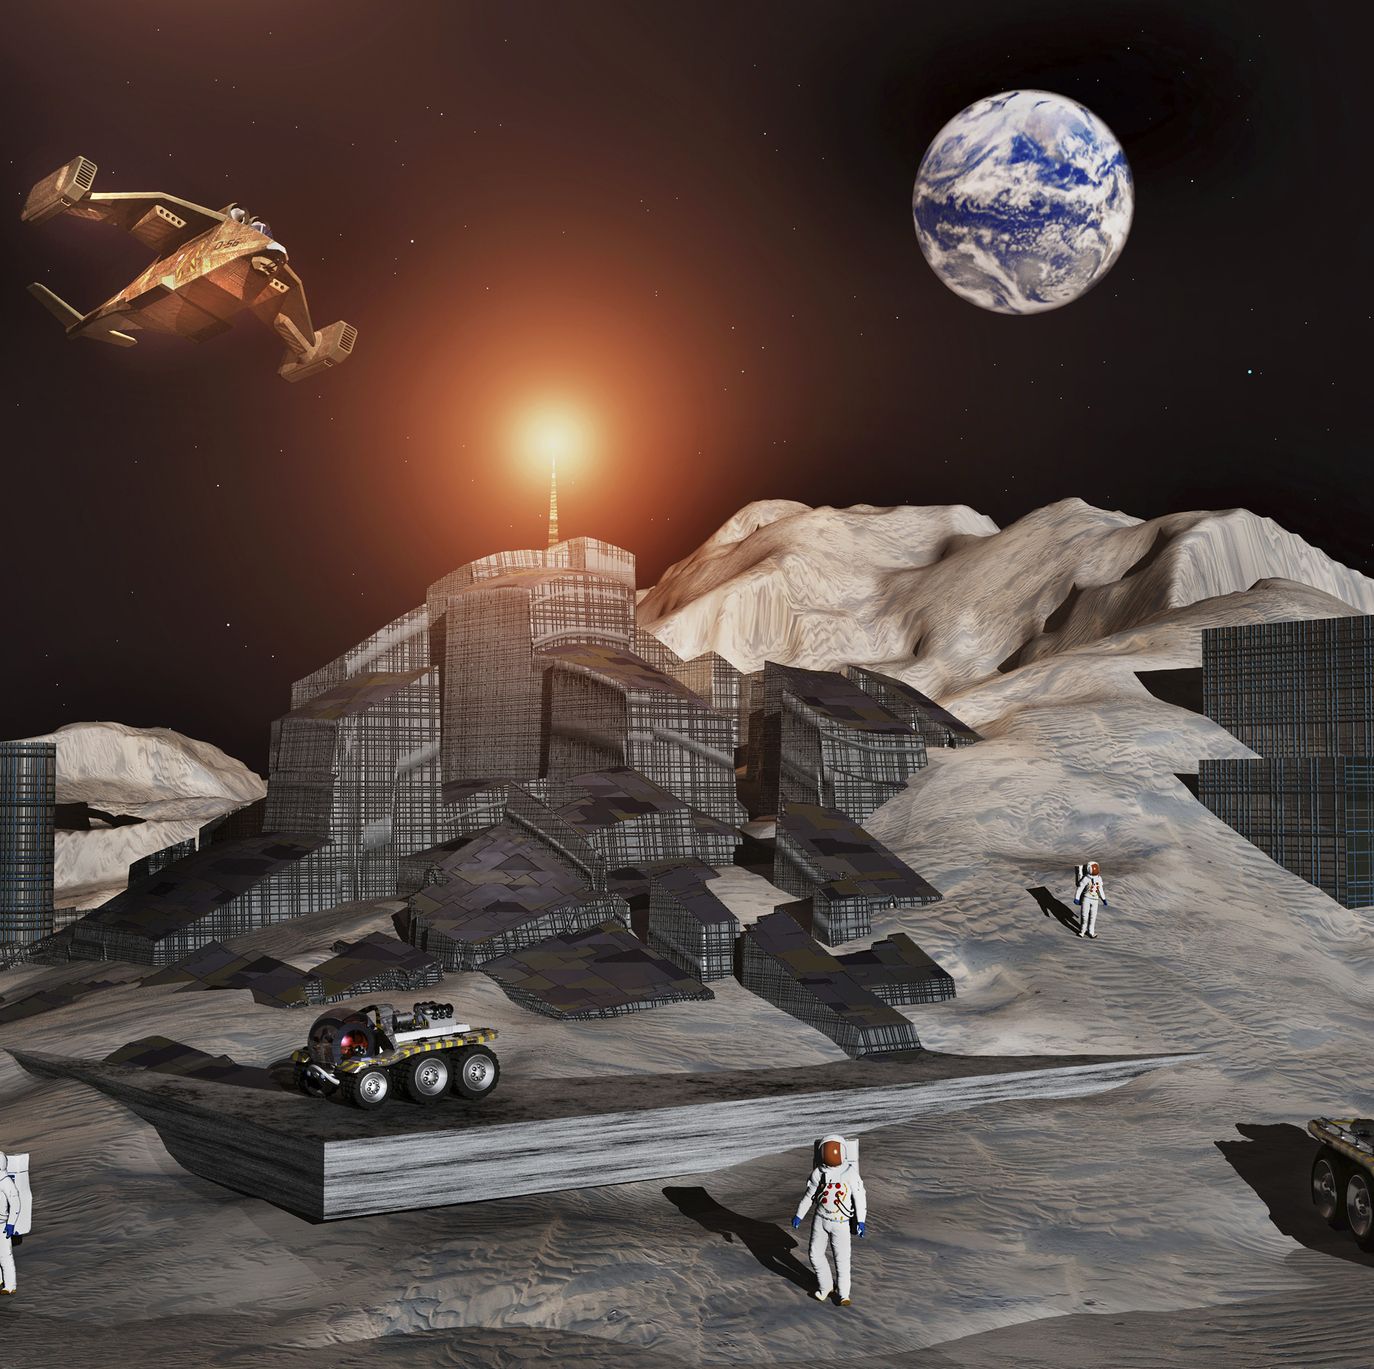 How We'll Turn the Moon Into the First Extraterrestrial Mining Base